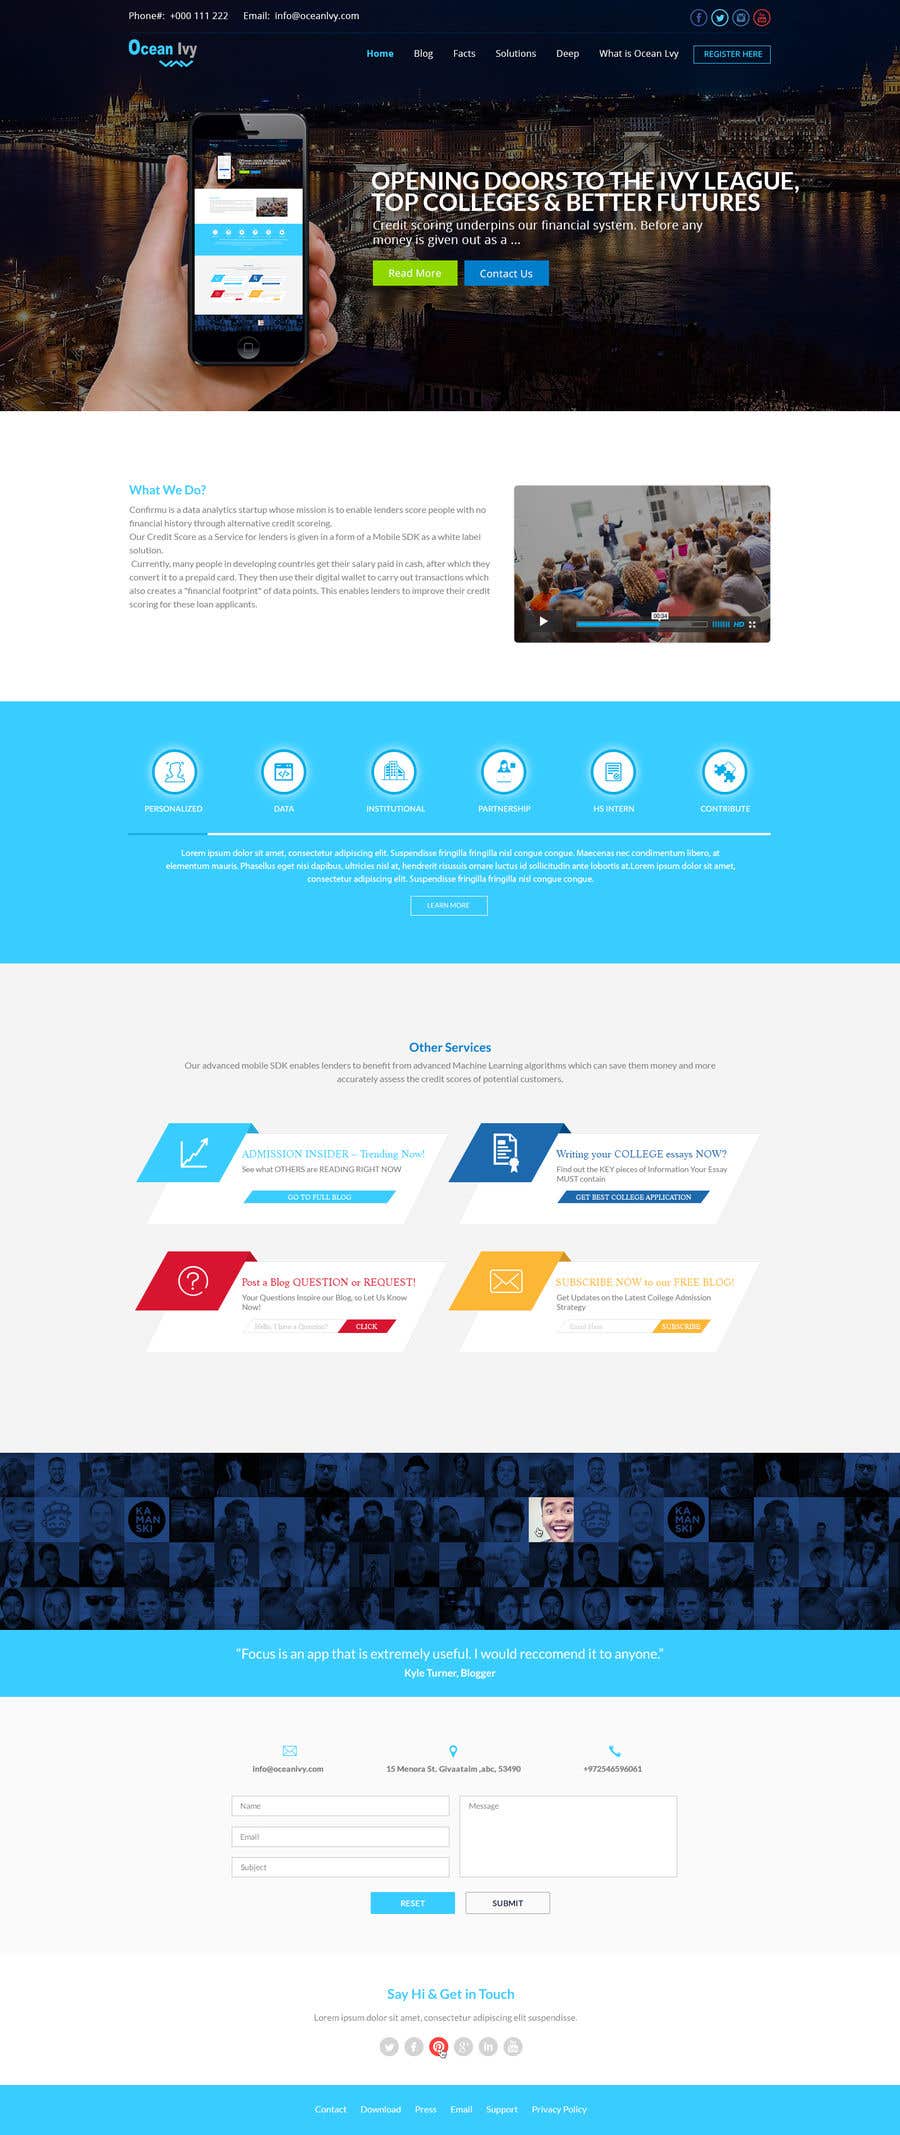 Proposition n°15 du concours                                                 Website Mockup of 1 landing home page, based on a Wordpress Theme
                                            